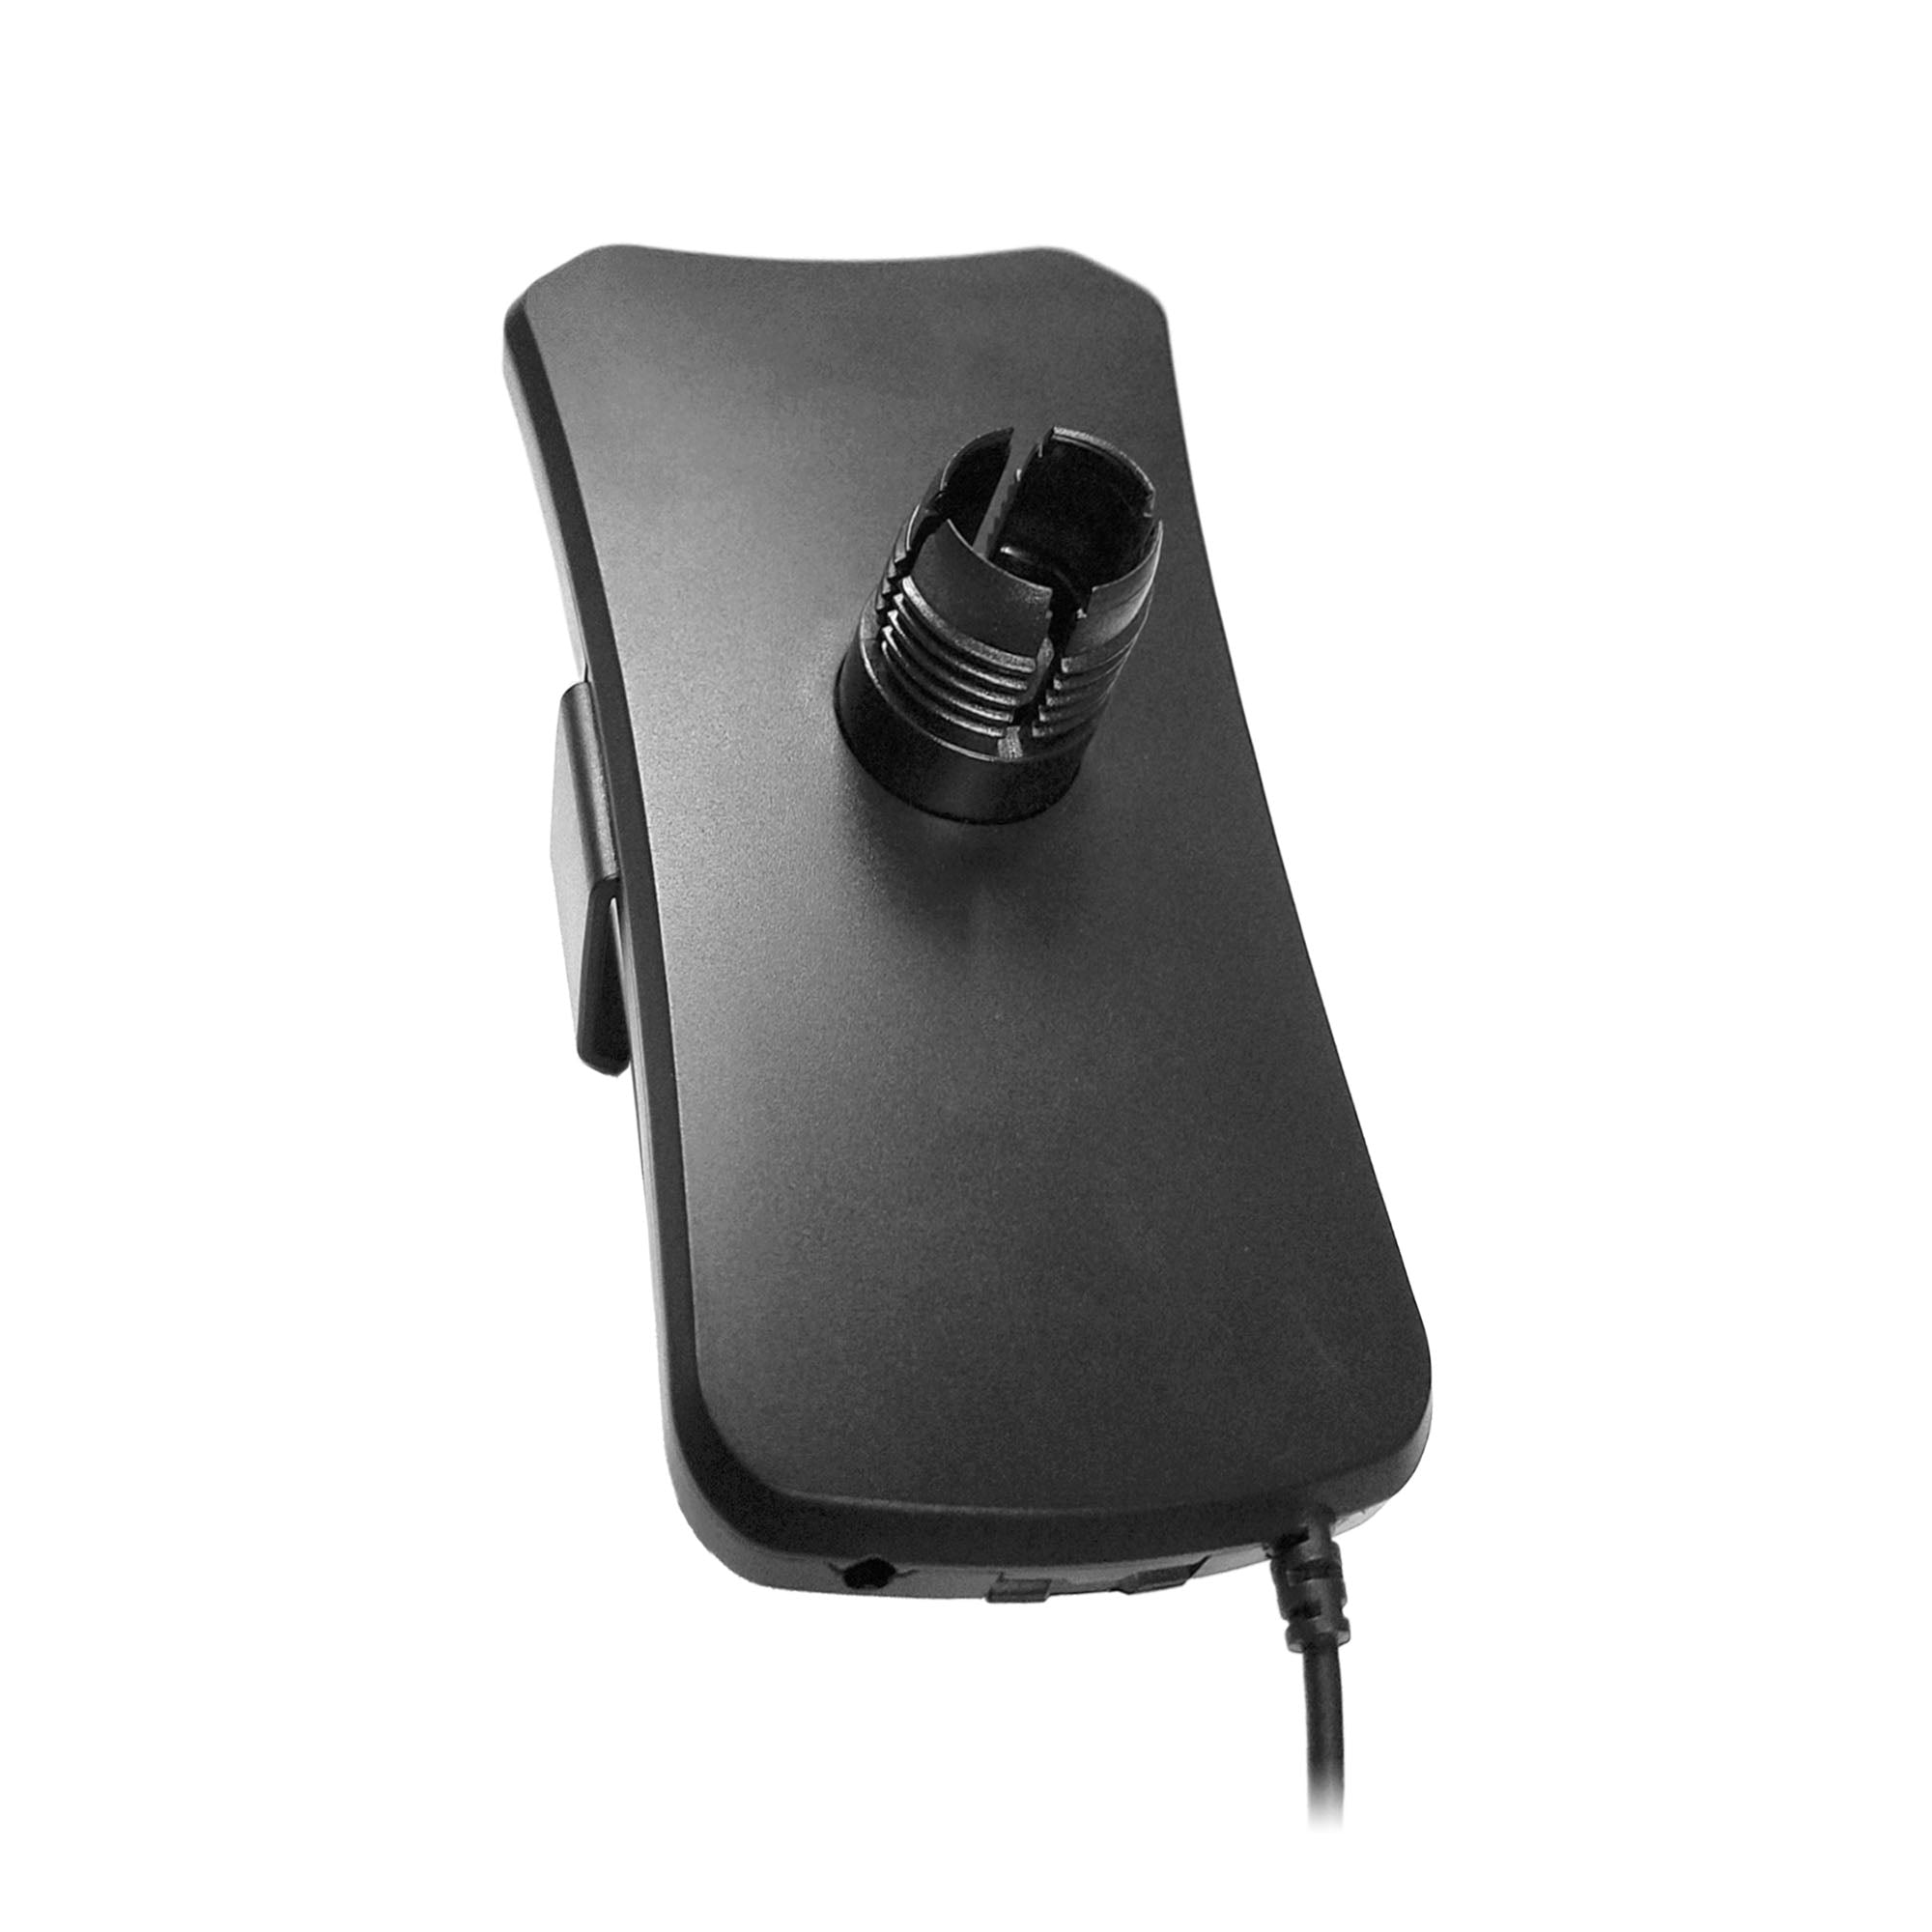 SureCall Black Universal Phone Cradle Antenna w/ FME-Male Connector